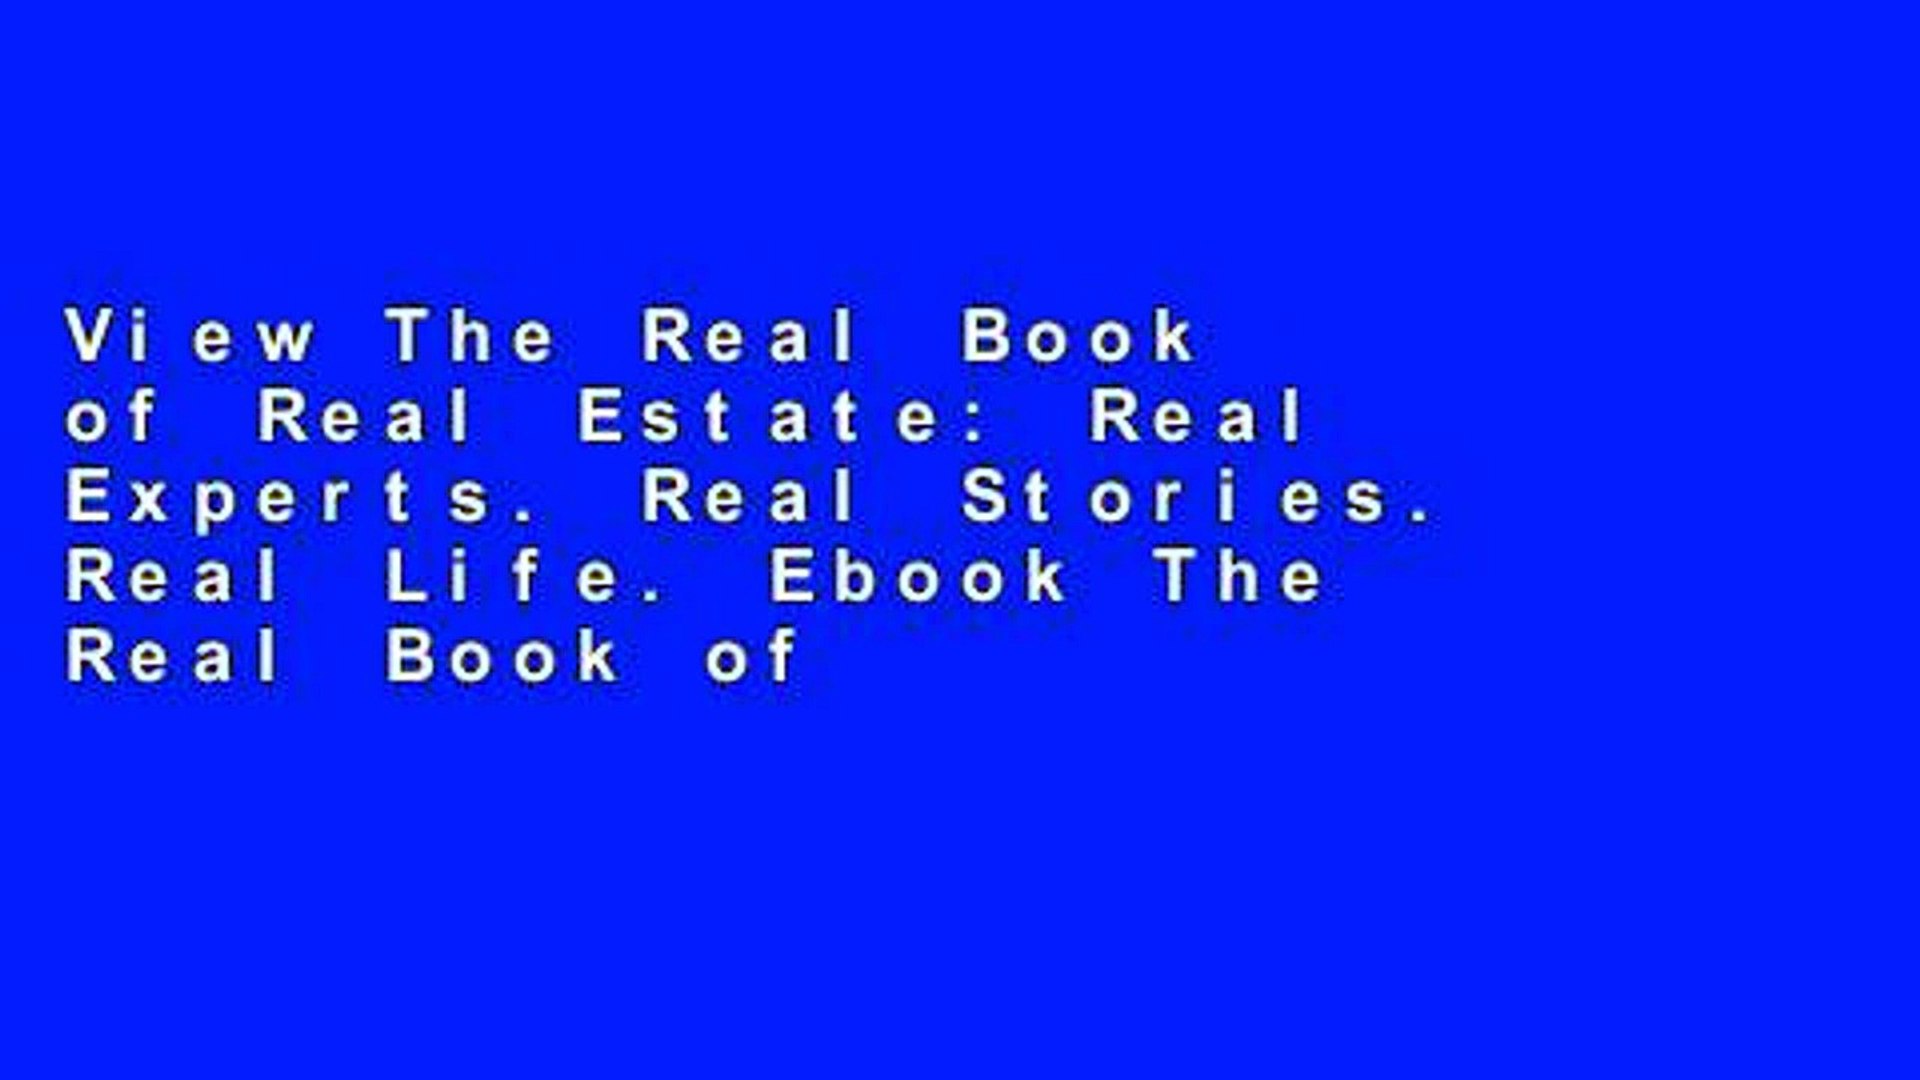 View The Real Book of Real Estate: Real Experts. Real Stories. Real Life. Ebook The Real Book of